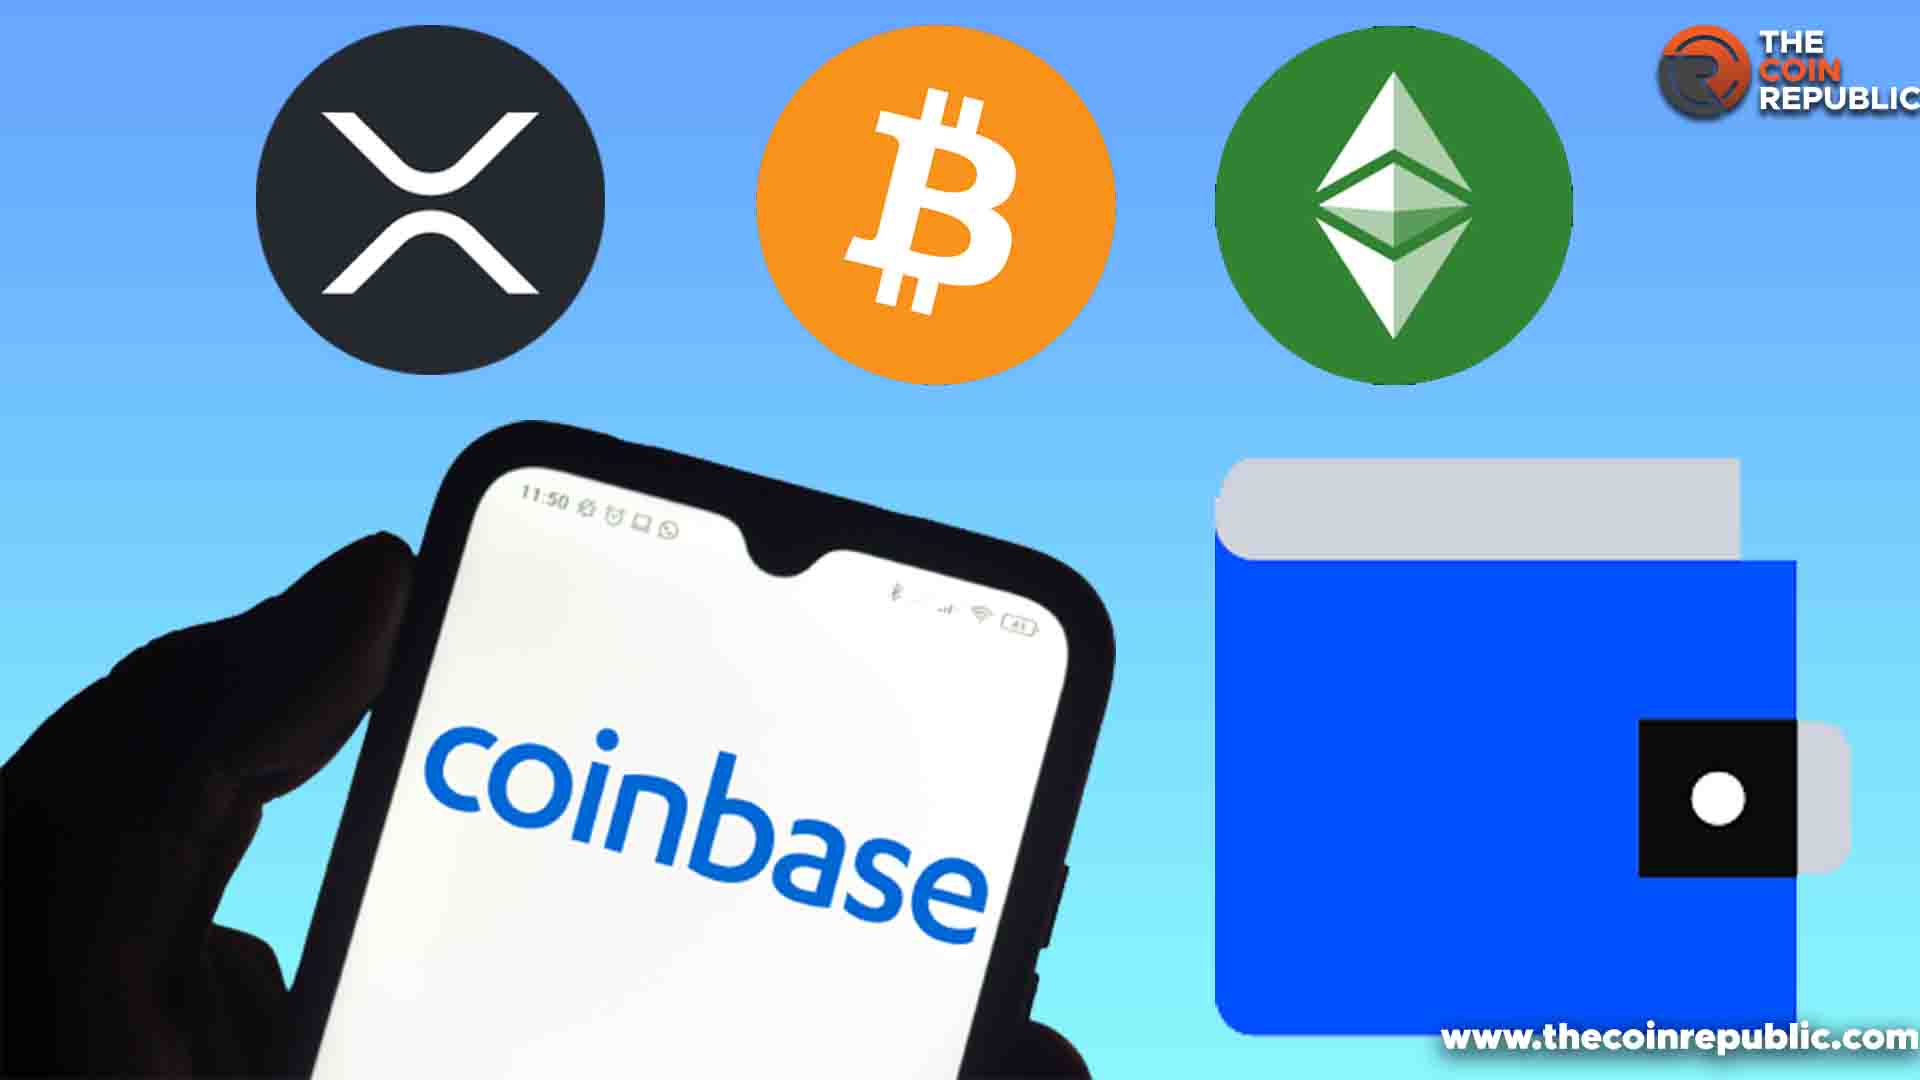 Coinbase Ends Bitcoin SV Support, Urges Immediate Withdrawal